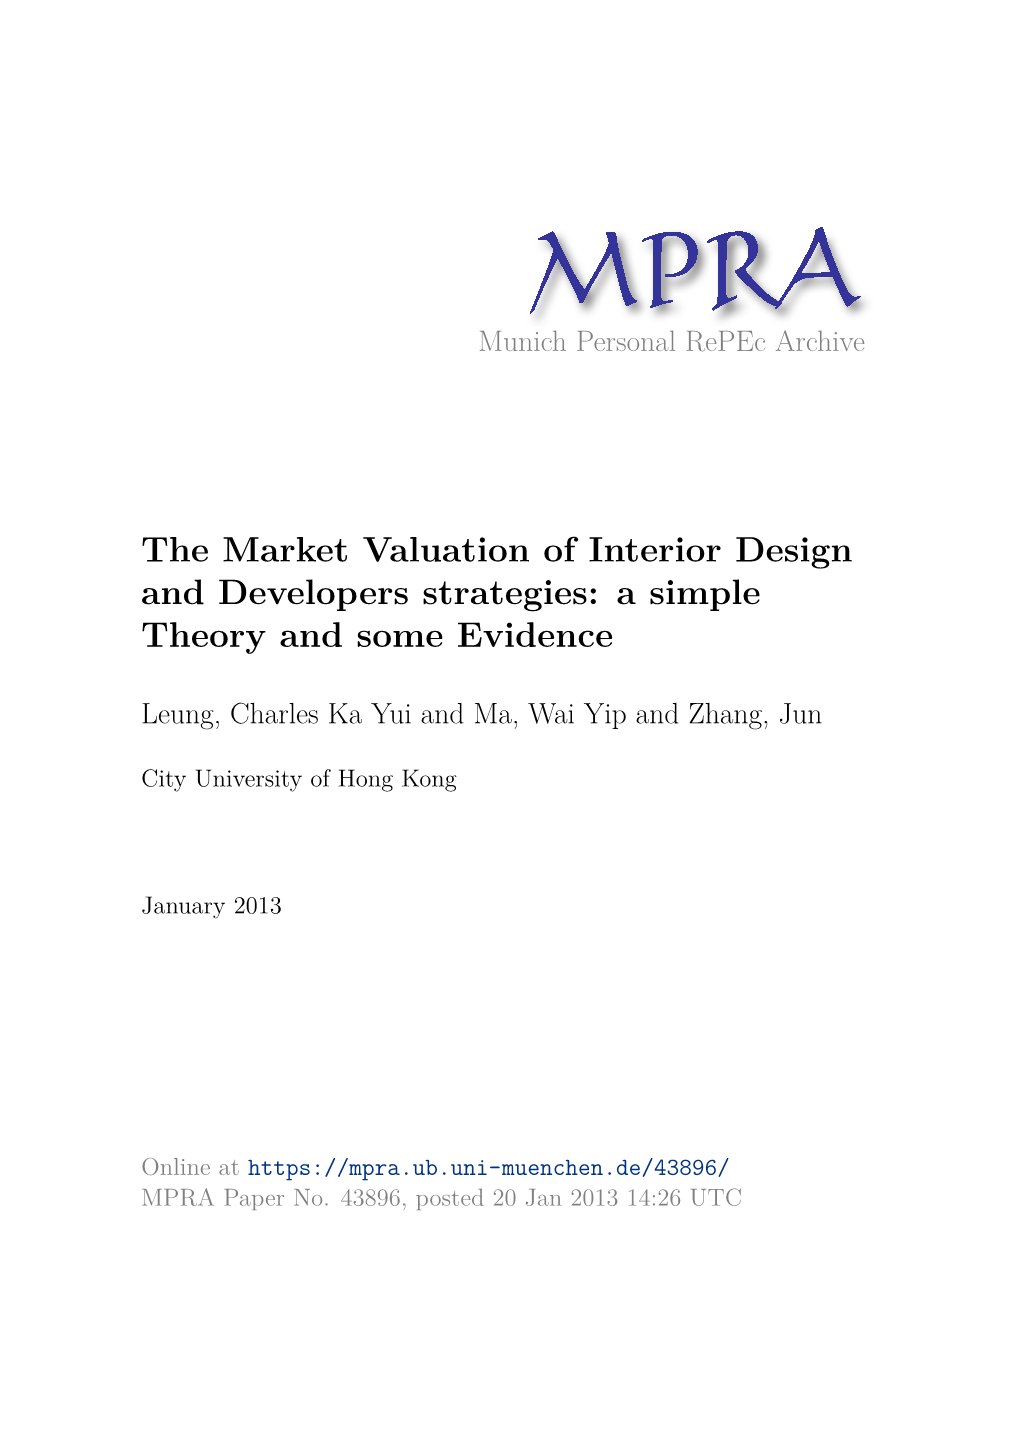 The Market Valuation of Interior Design and Developers Strategies: a Simple Theory and Some Evidence